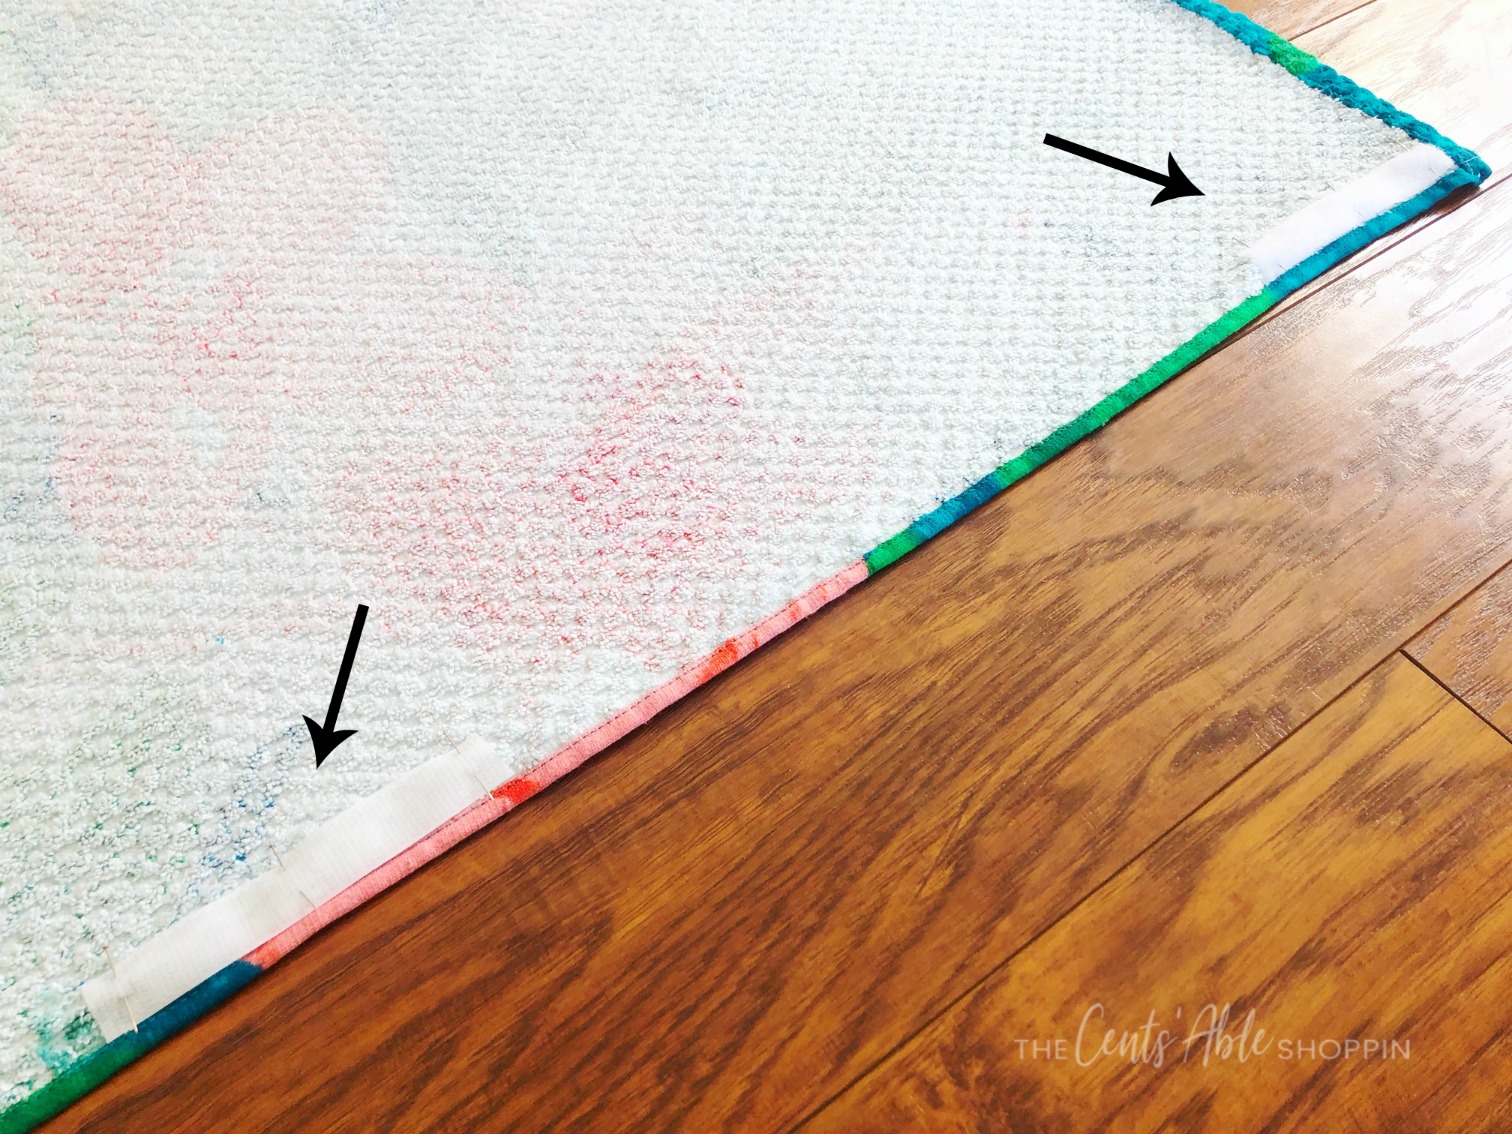 Sew Velcro on Beach Towel \\ This simple beach towel DIY takes just minutes and will prevent your towel from slipping off your chair when relaxing around the pool or beach this summer!